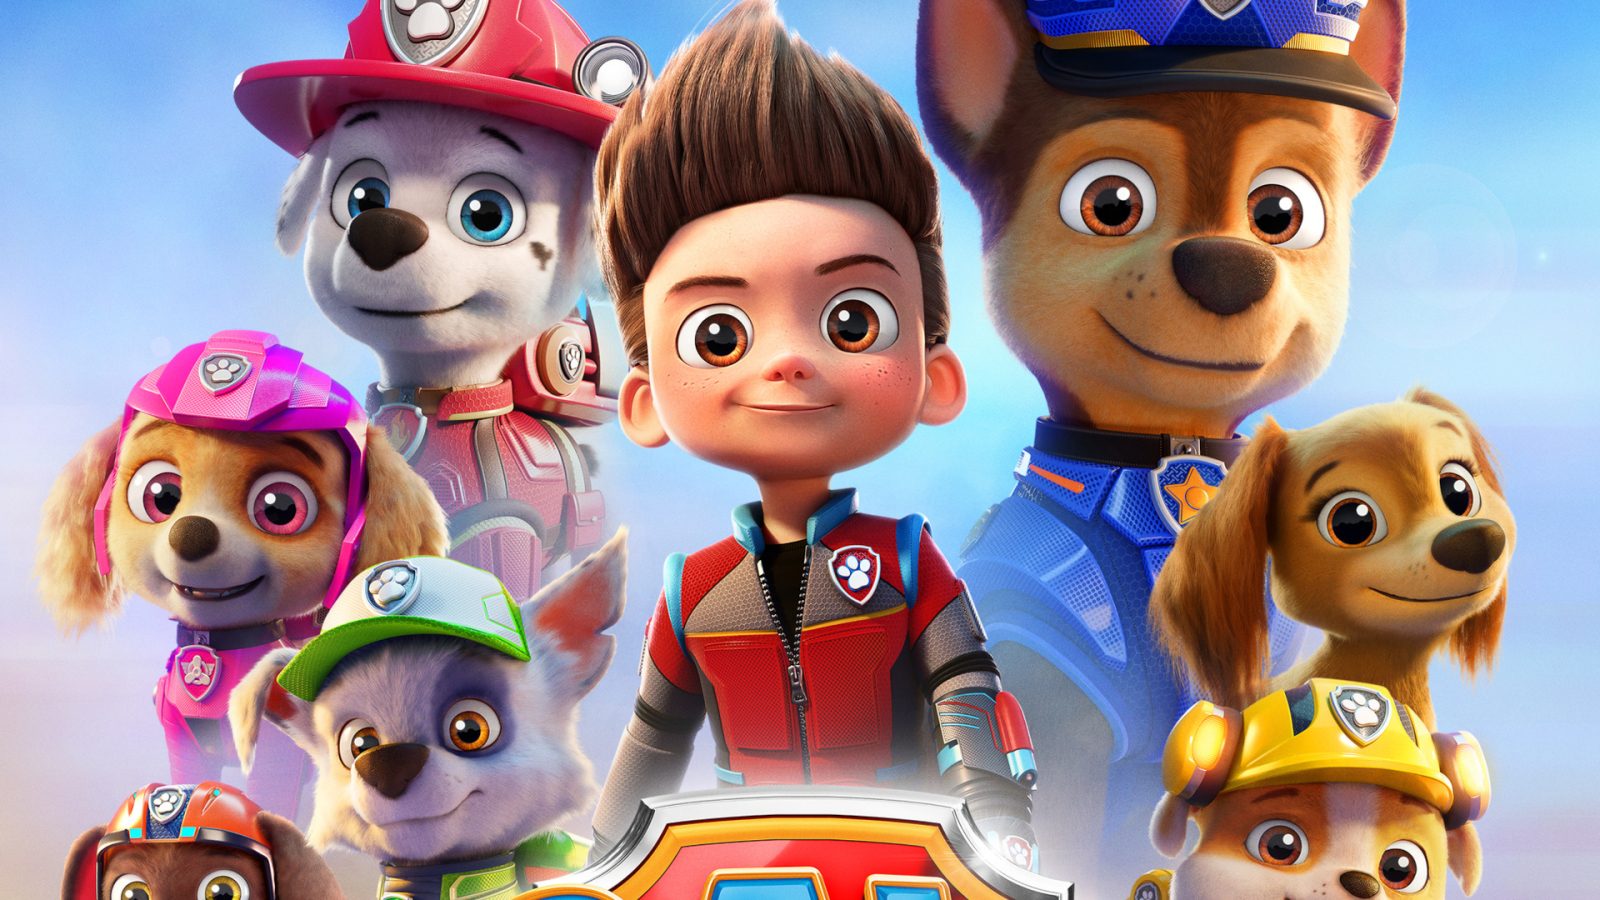 “Paw Patrol” turns 10: the second full-length film will be released in September